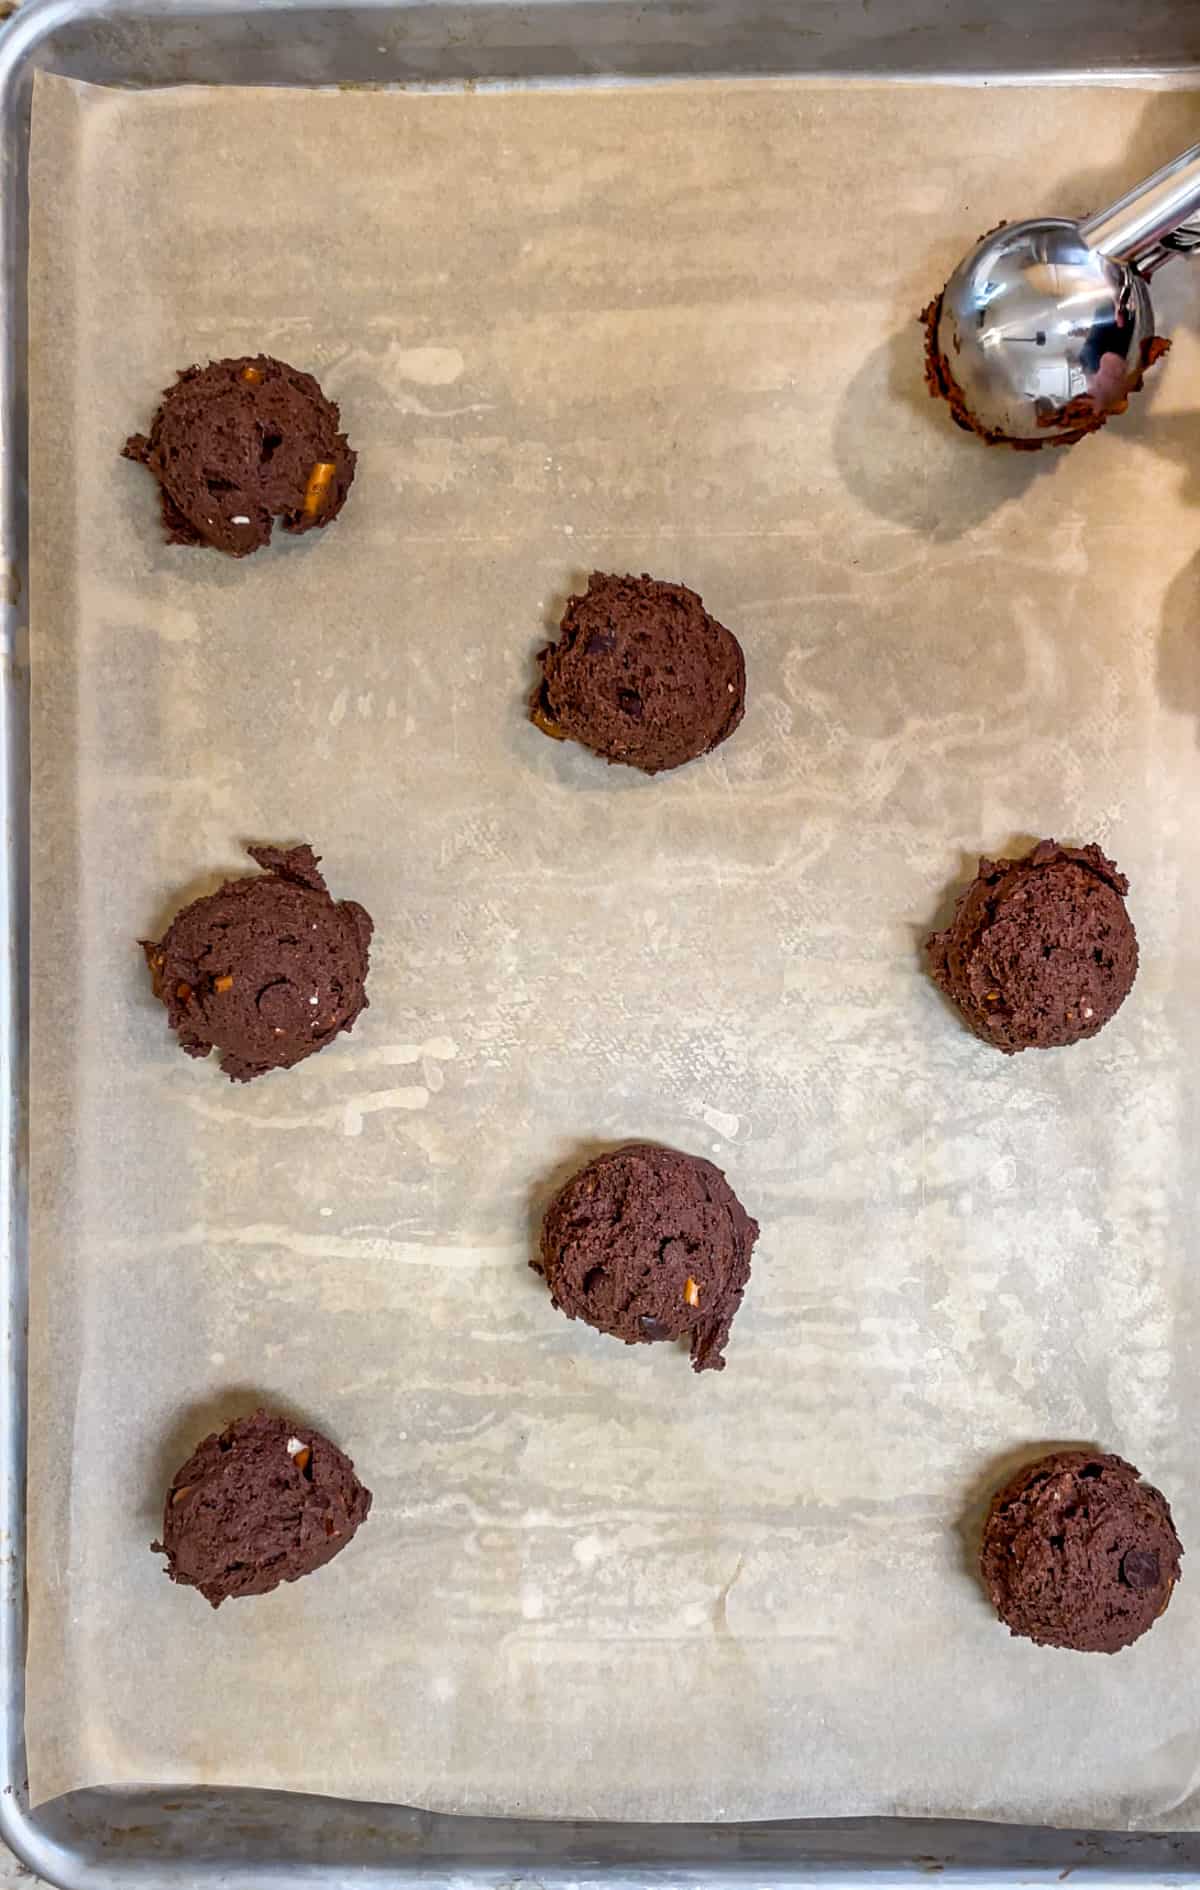 Chocolate cookie dough balls on a parchment lined baking sheet ready for the oven.